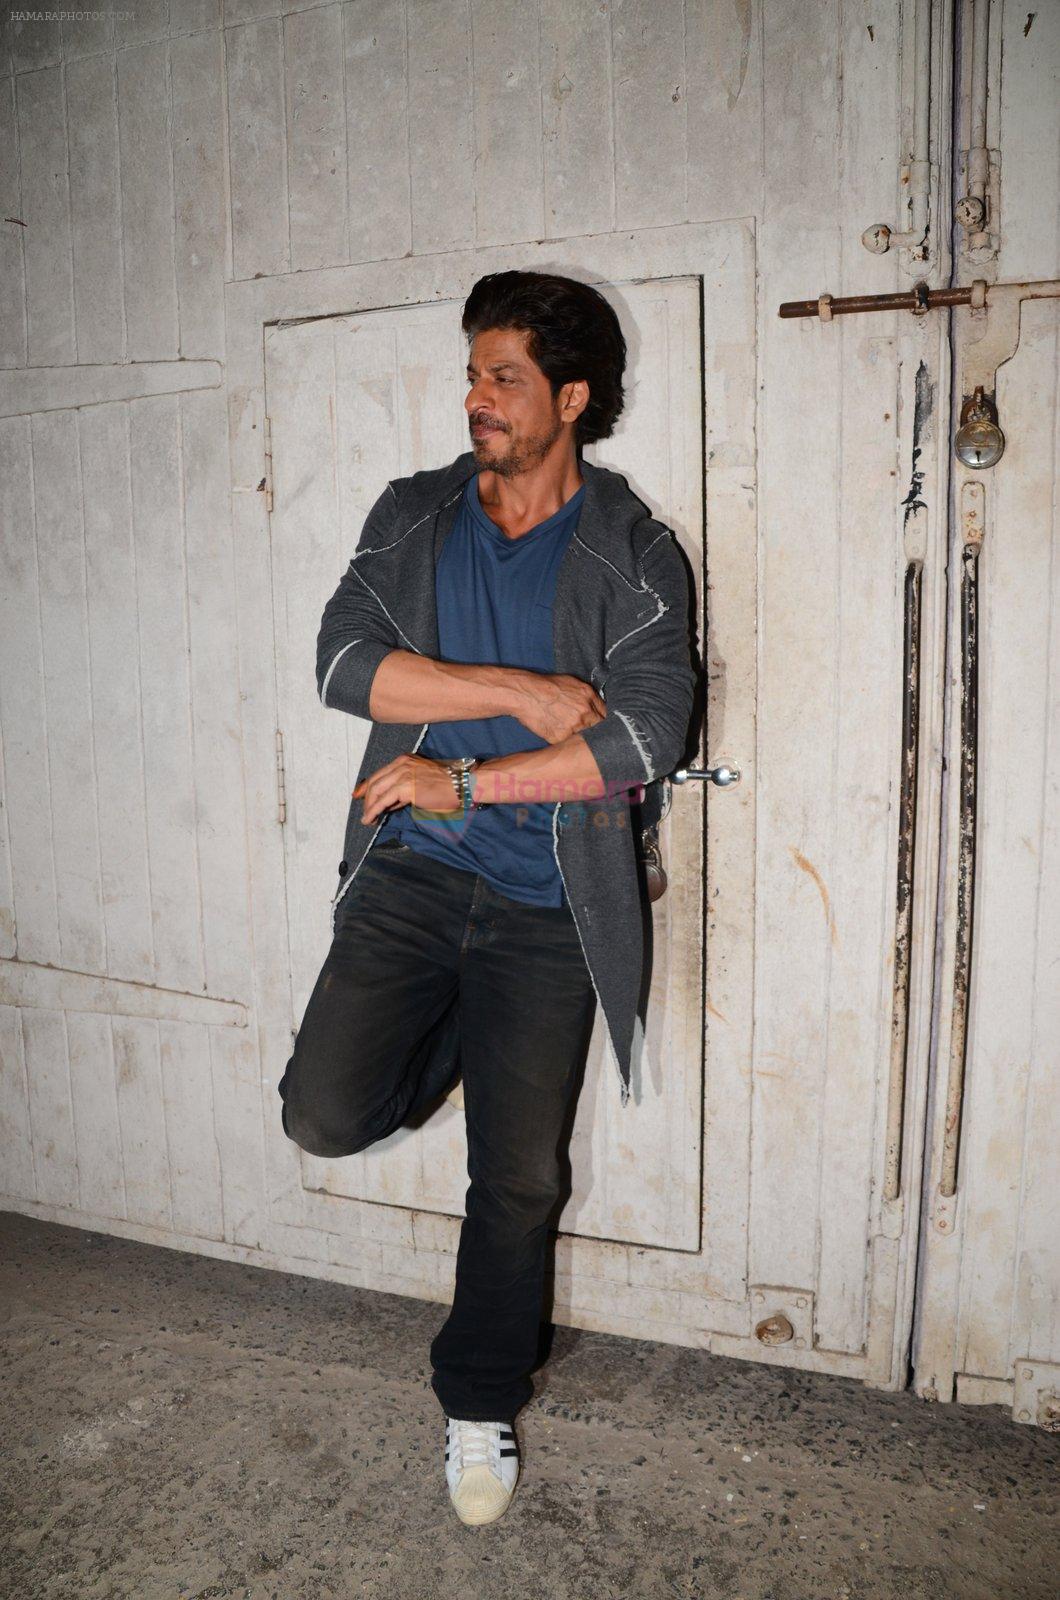 Shah Rukh Khan snapped as he promotes Raees on 12th Jan 2017